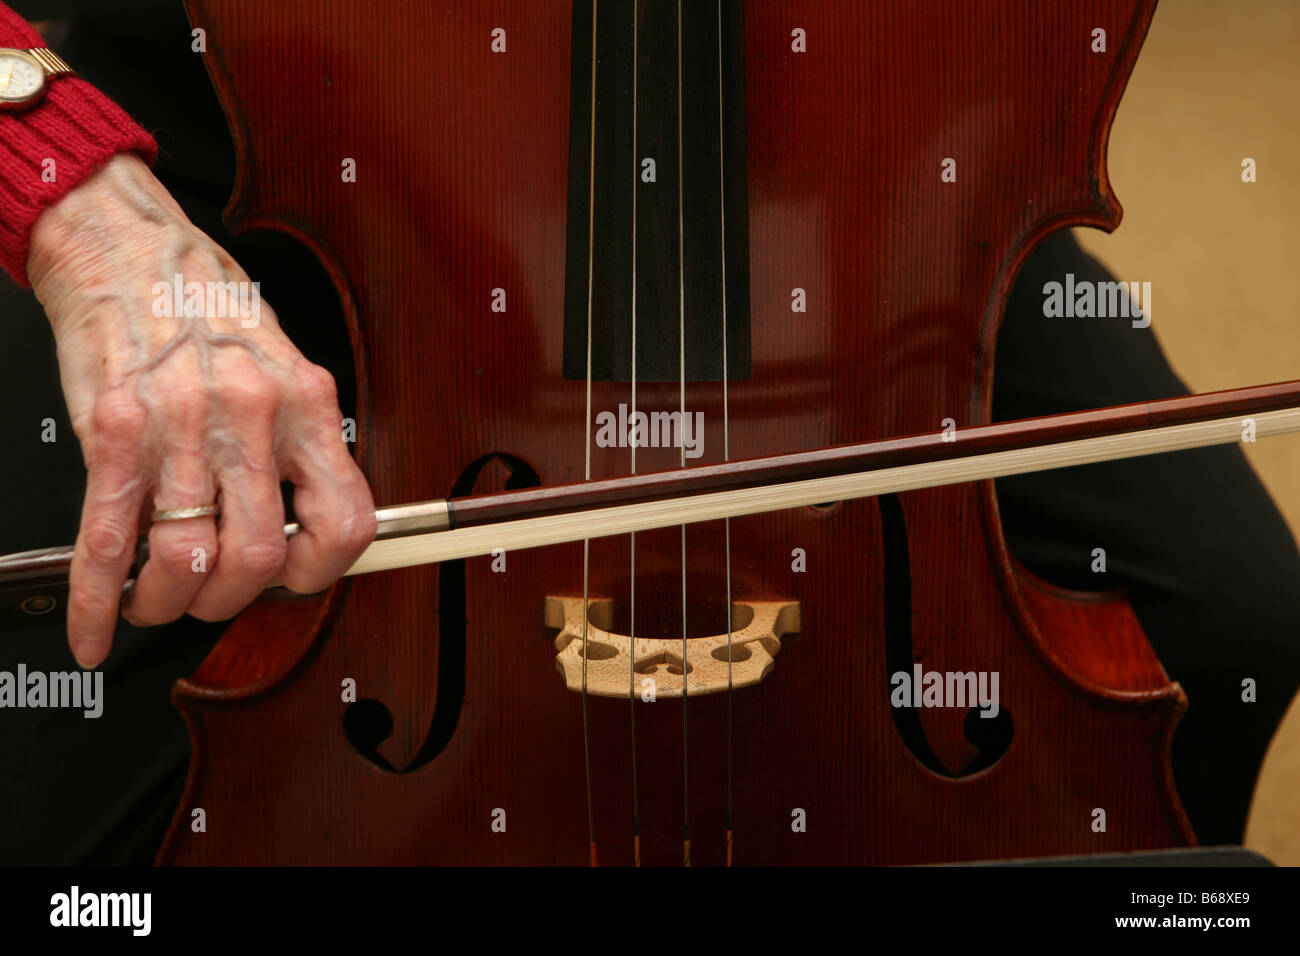 Elderly woman cellist strumming cello strings with bow Stock Photo - Alamy